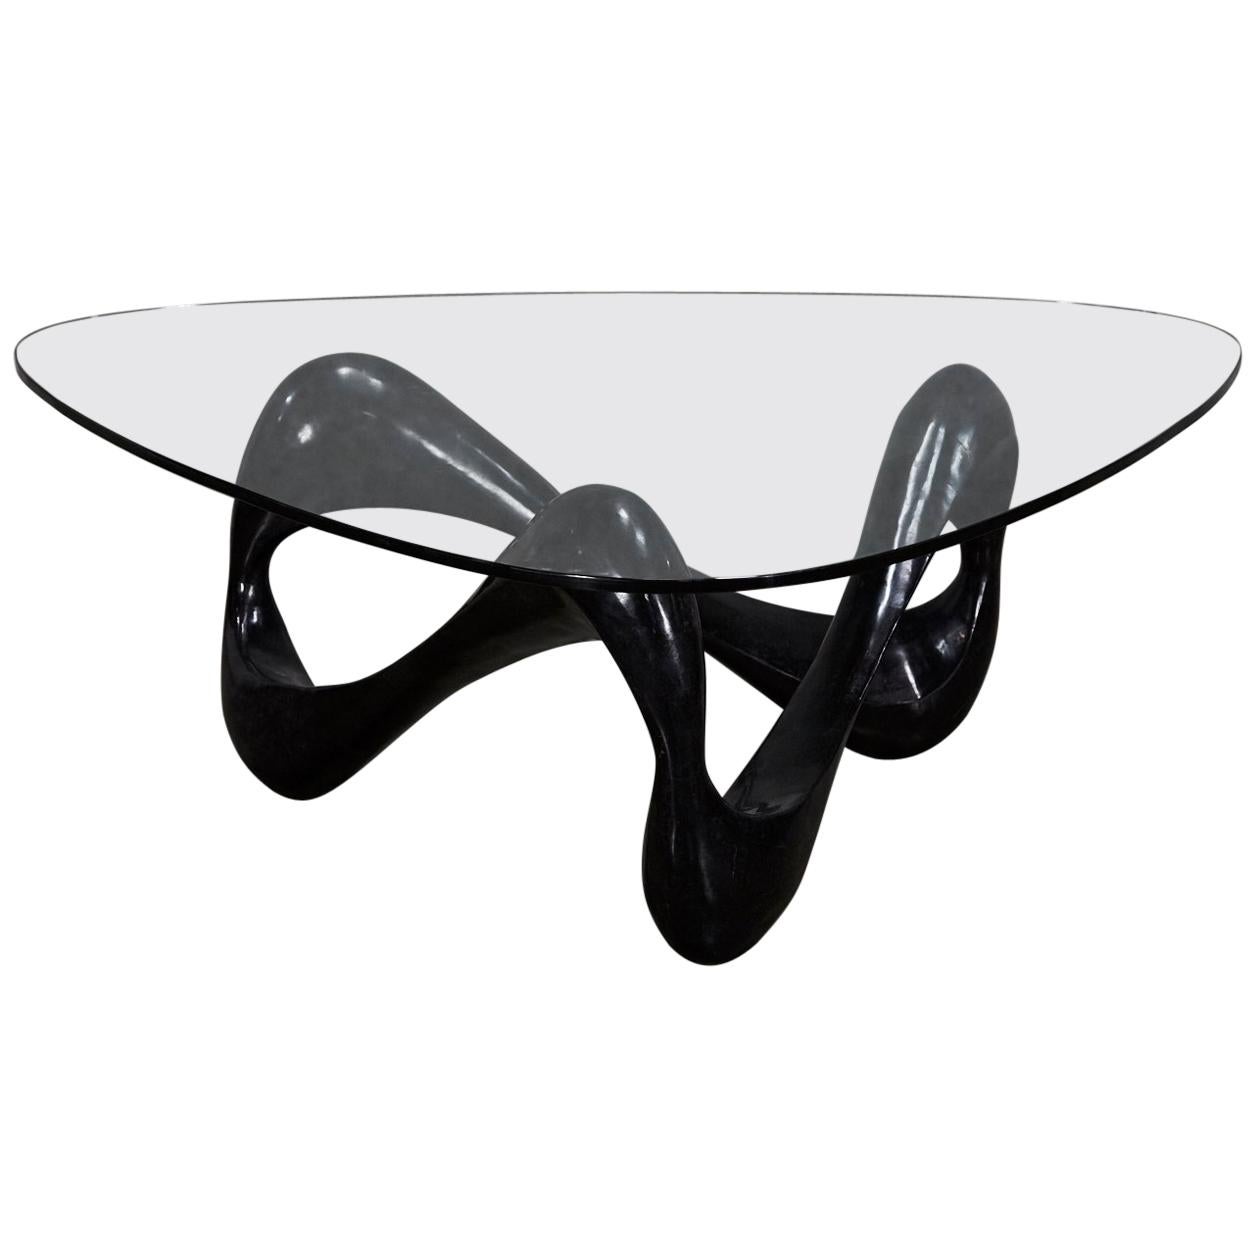 Freeform Black Tessellated Stone "Cursive" Coffee Table with Glass Top, 1990s For Sale